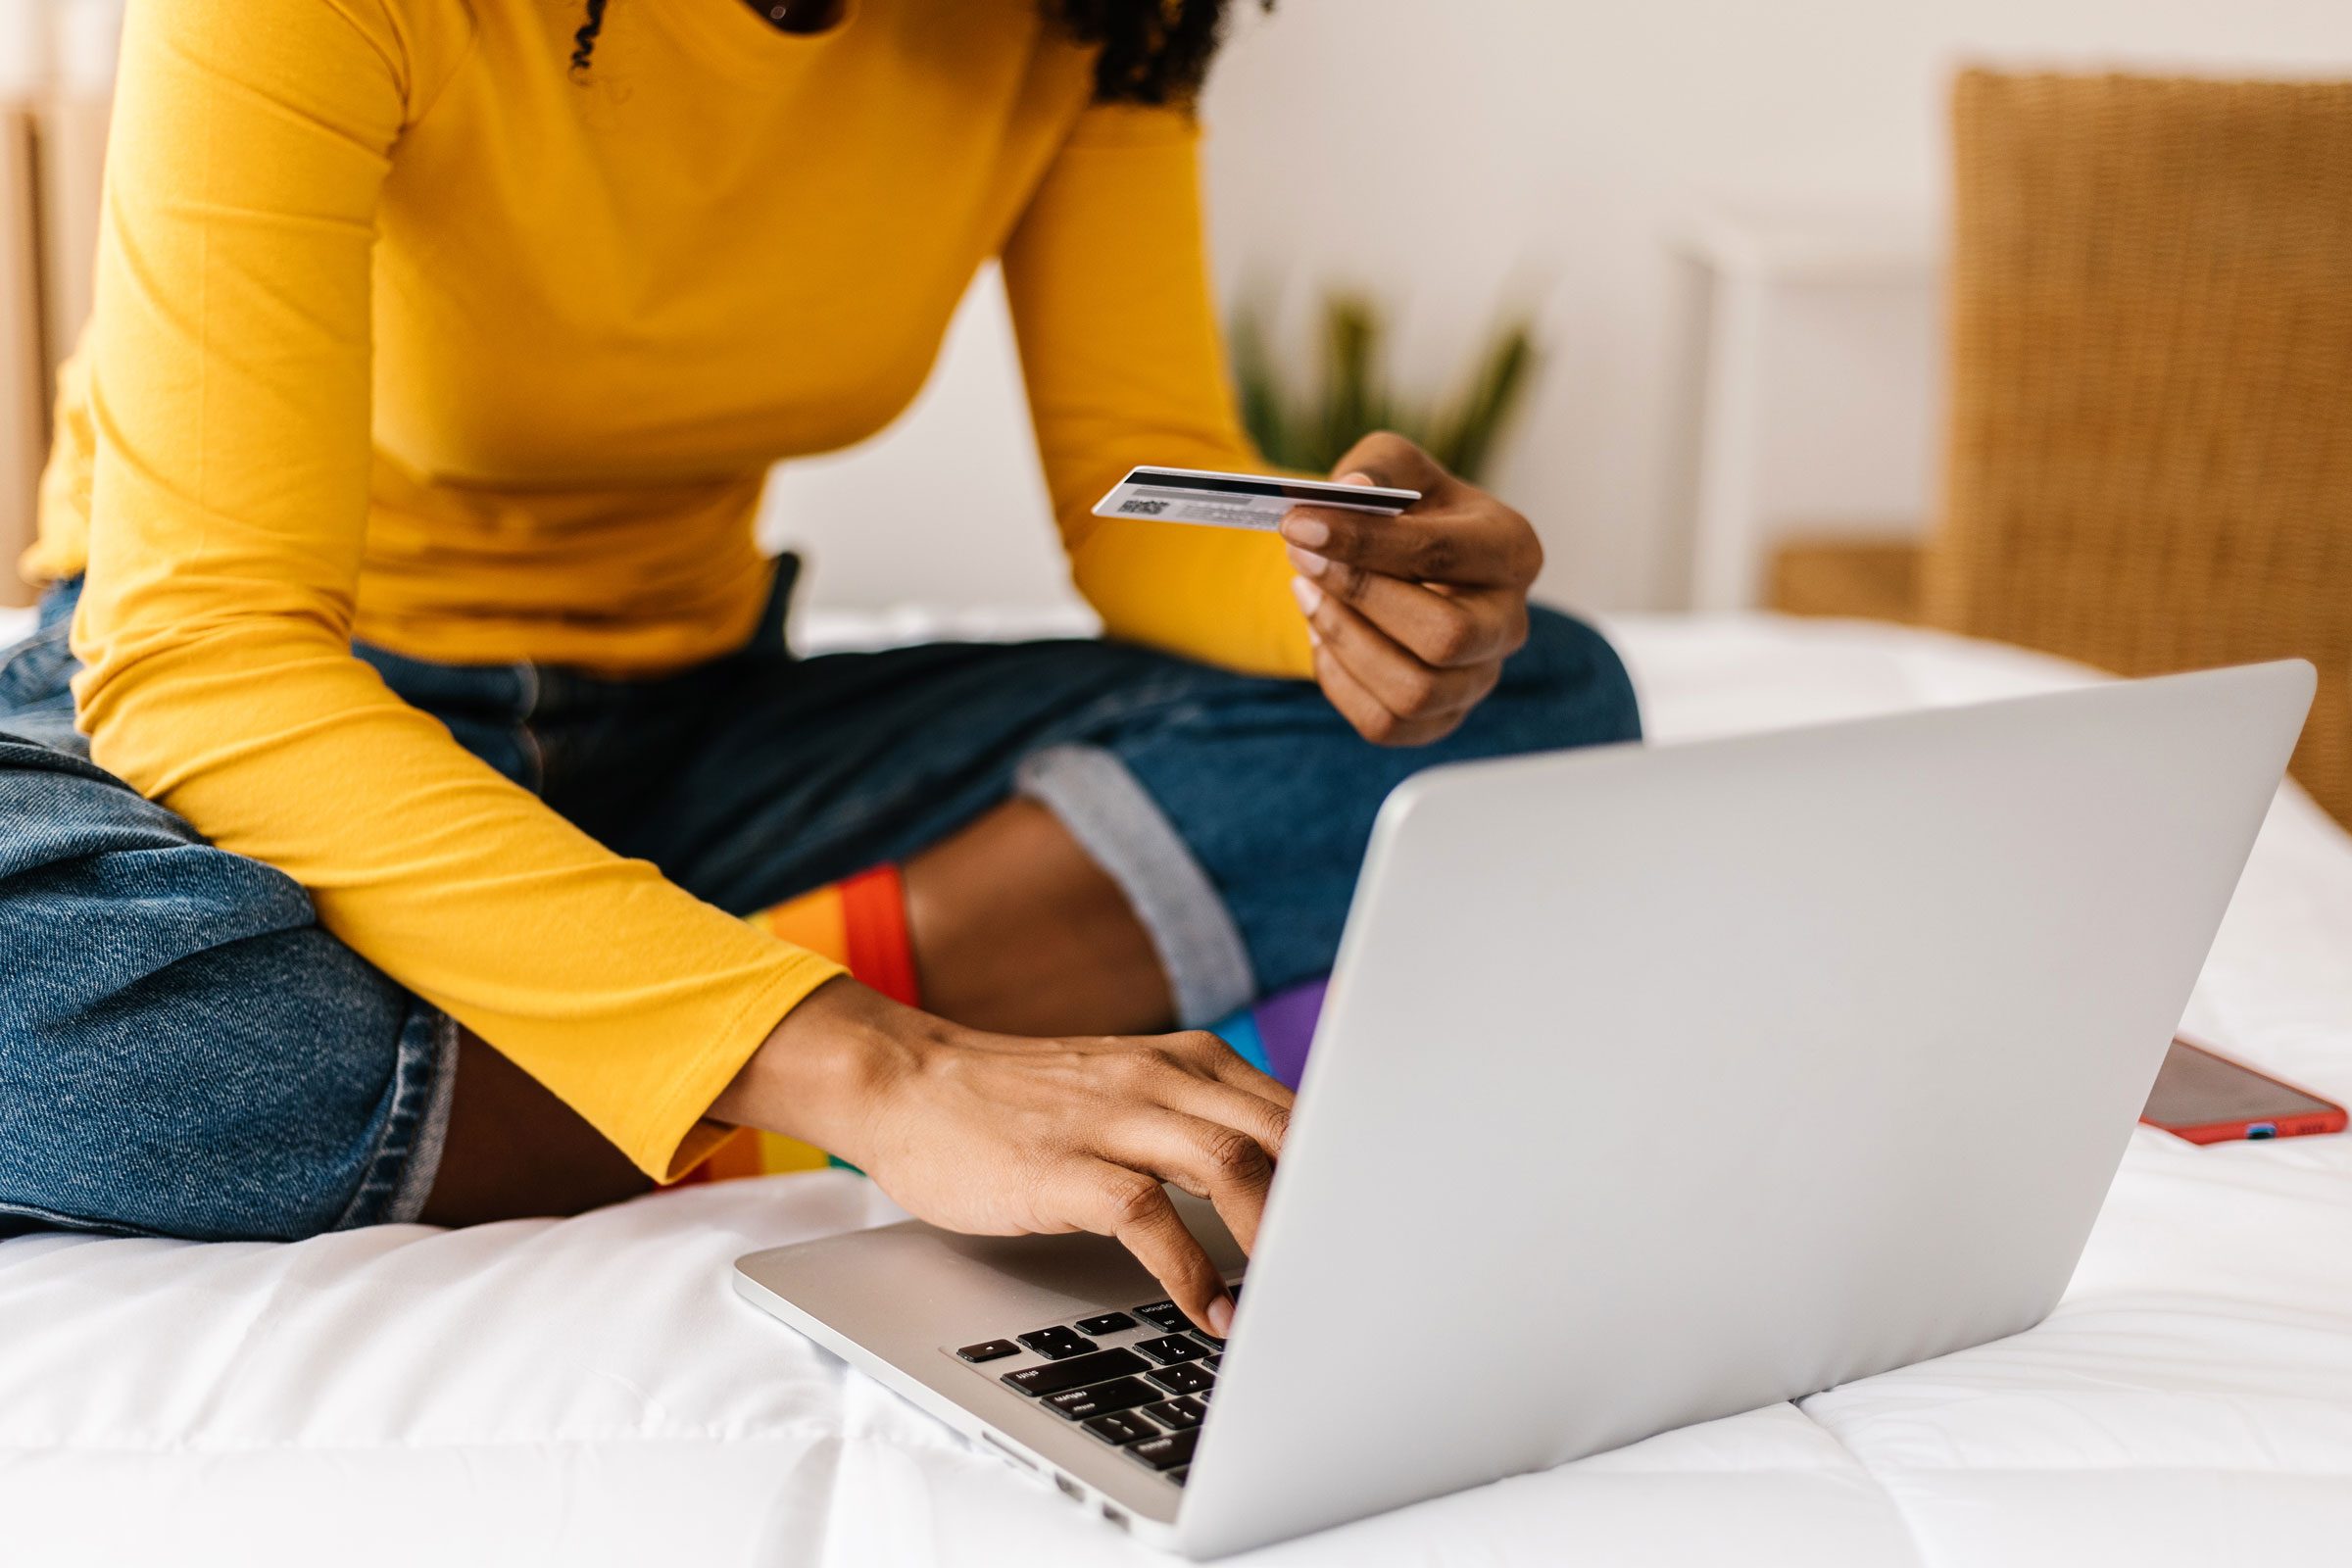 woman ordering home goods online with a credit card and laptop while sitting on a bed